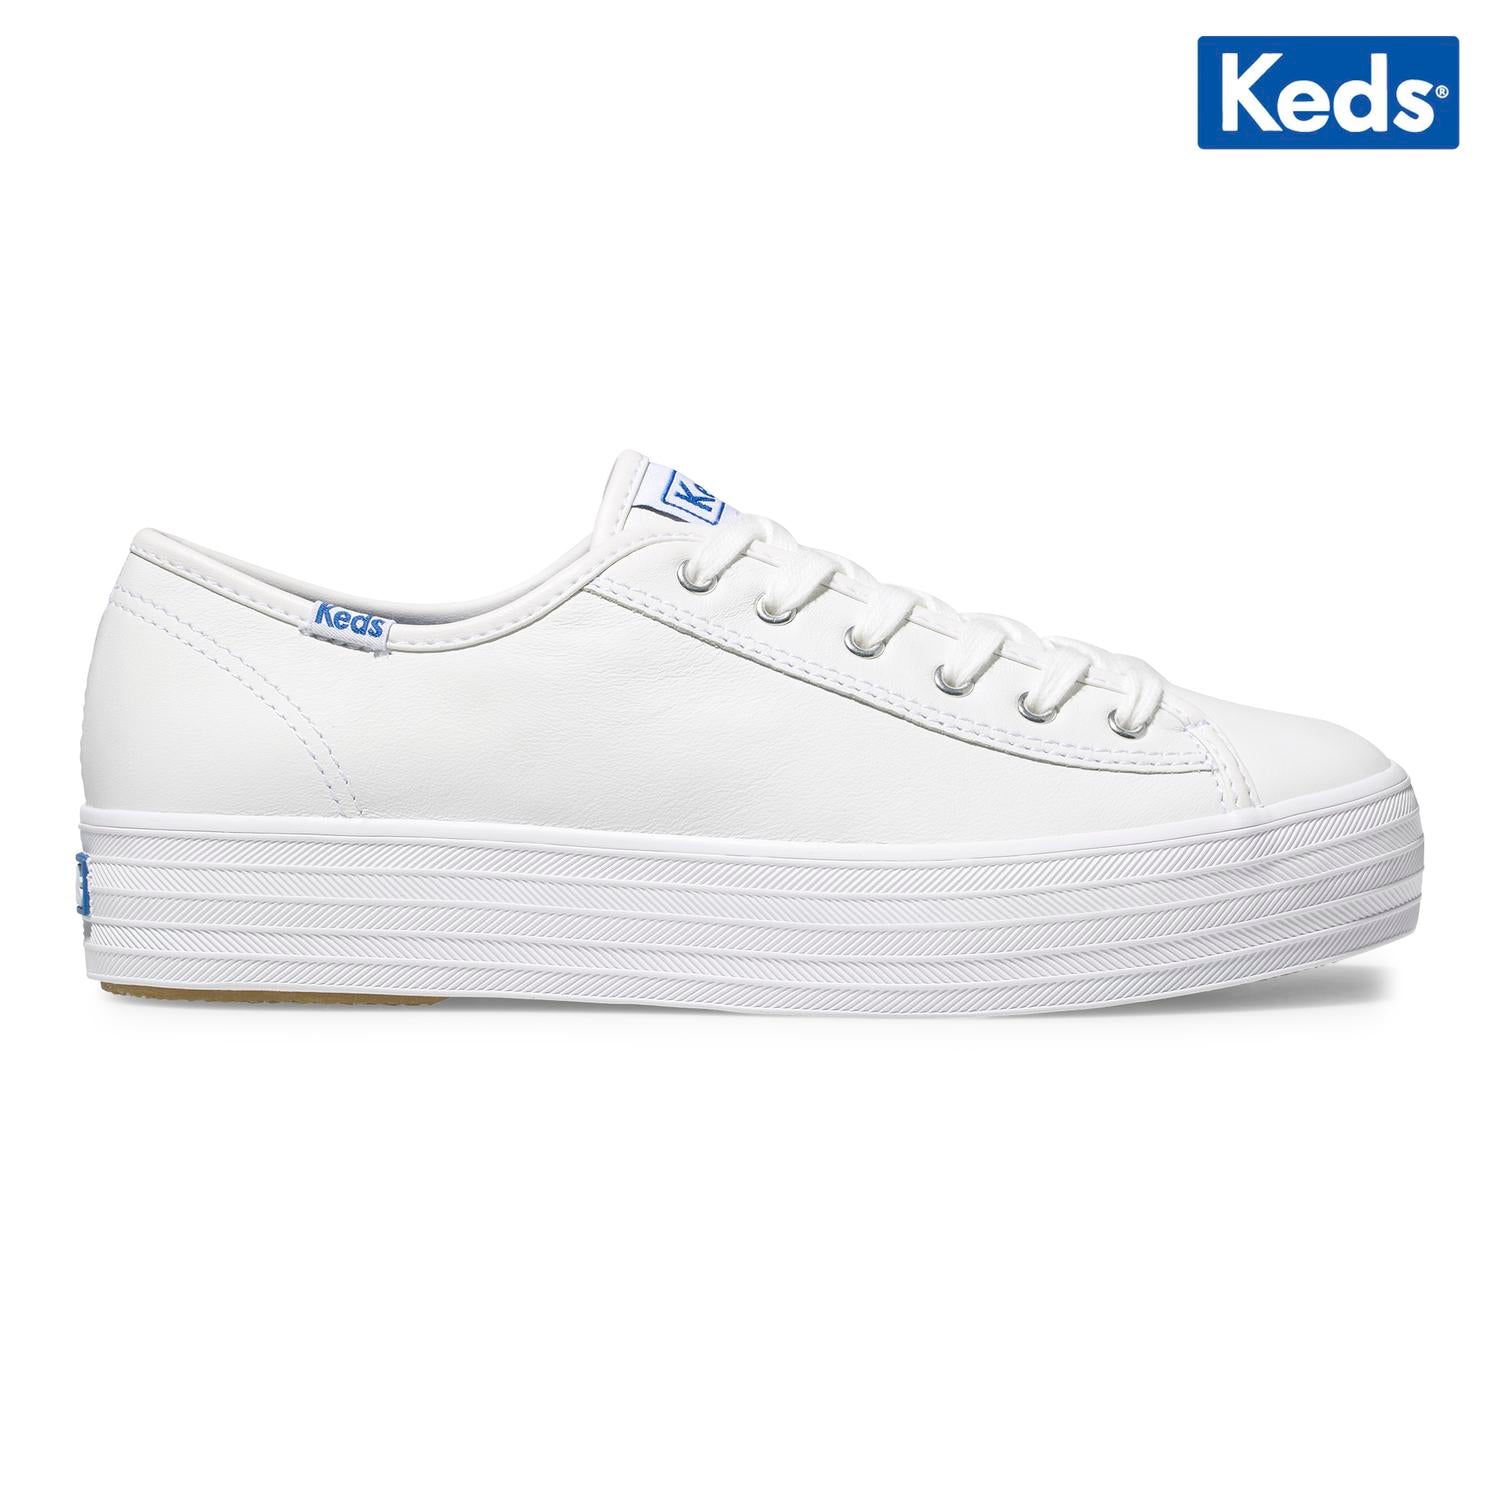 KEDS Triple Kick Leather Sneakers in White